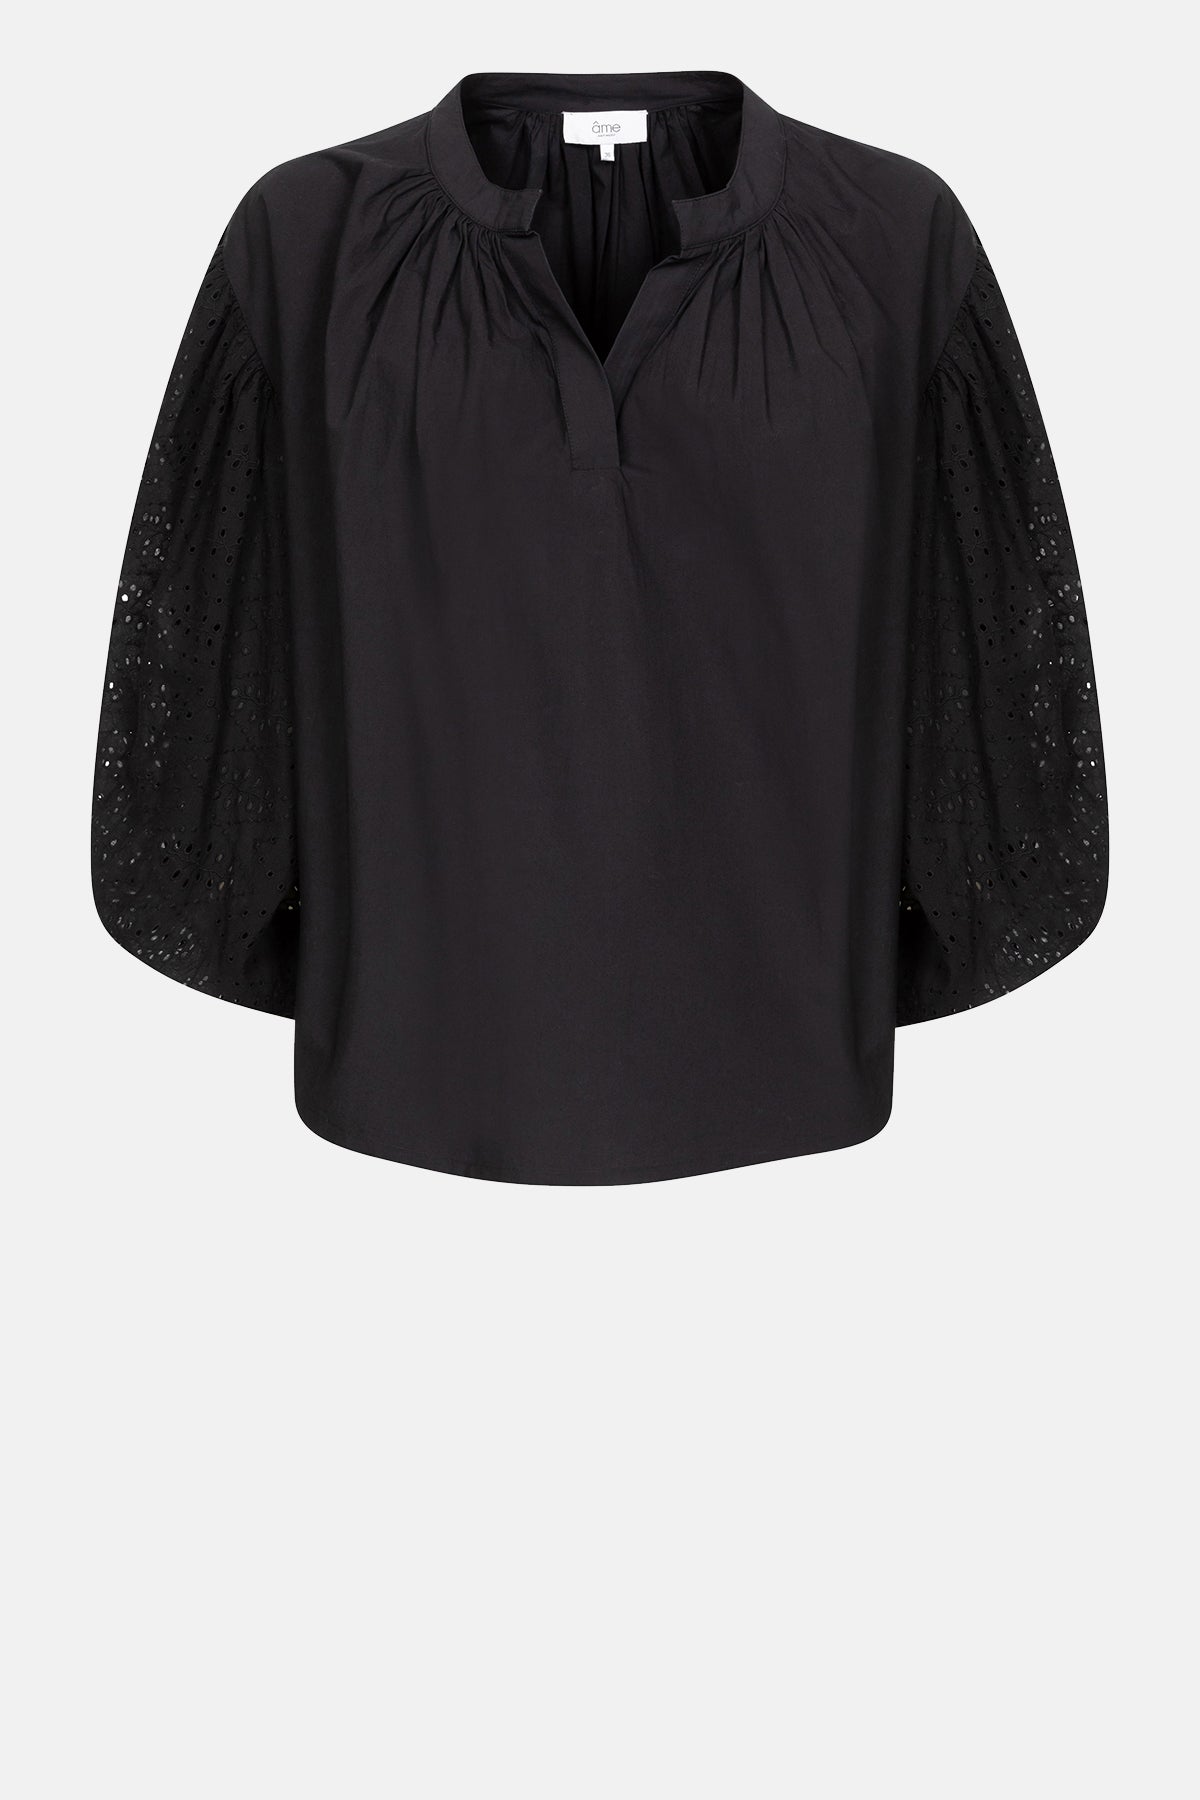 Islande Top with Puff Sleeves | Black Embroidered Cotton